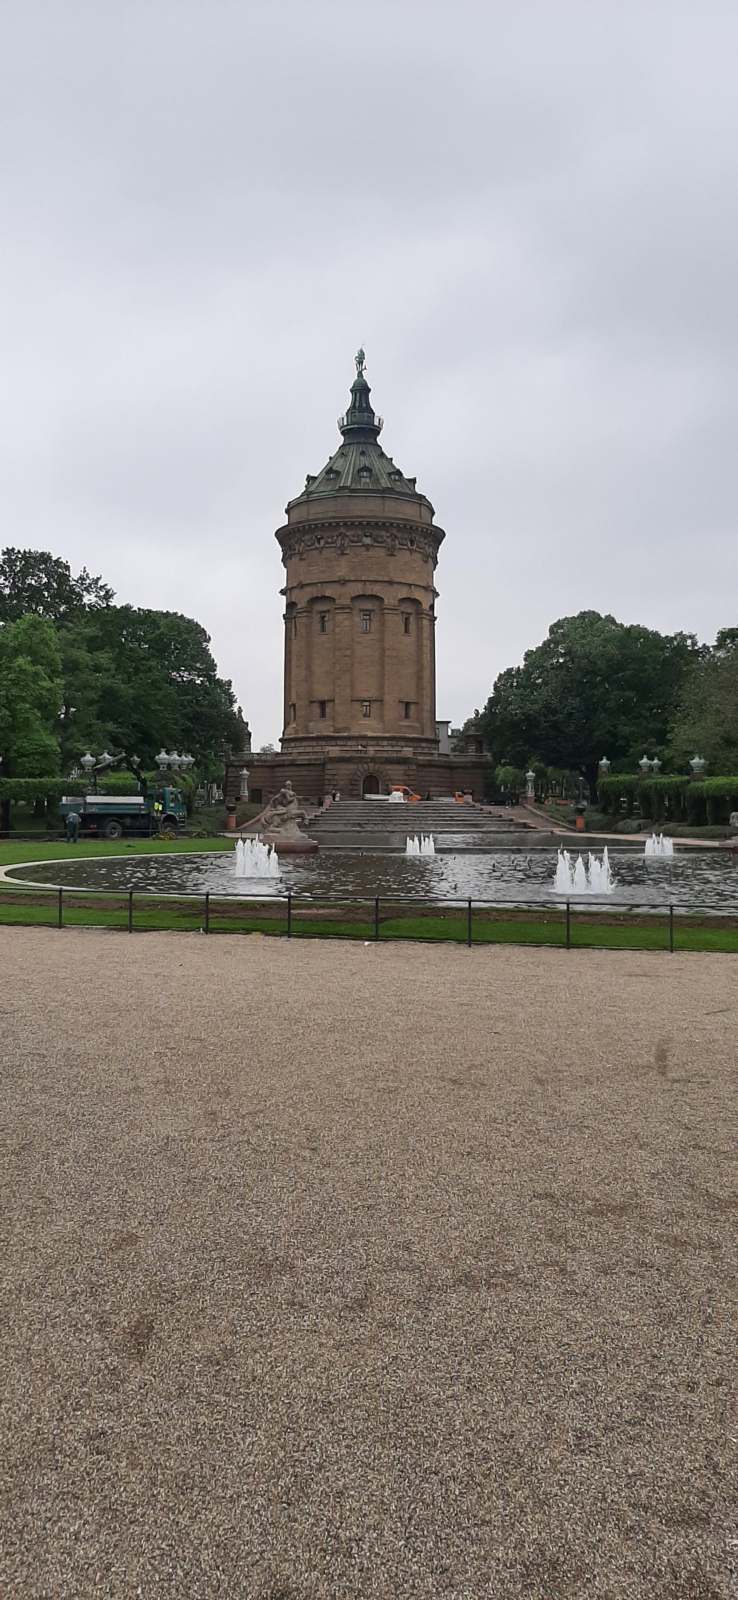 The water tower in Mannheim, with and without Wallies.